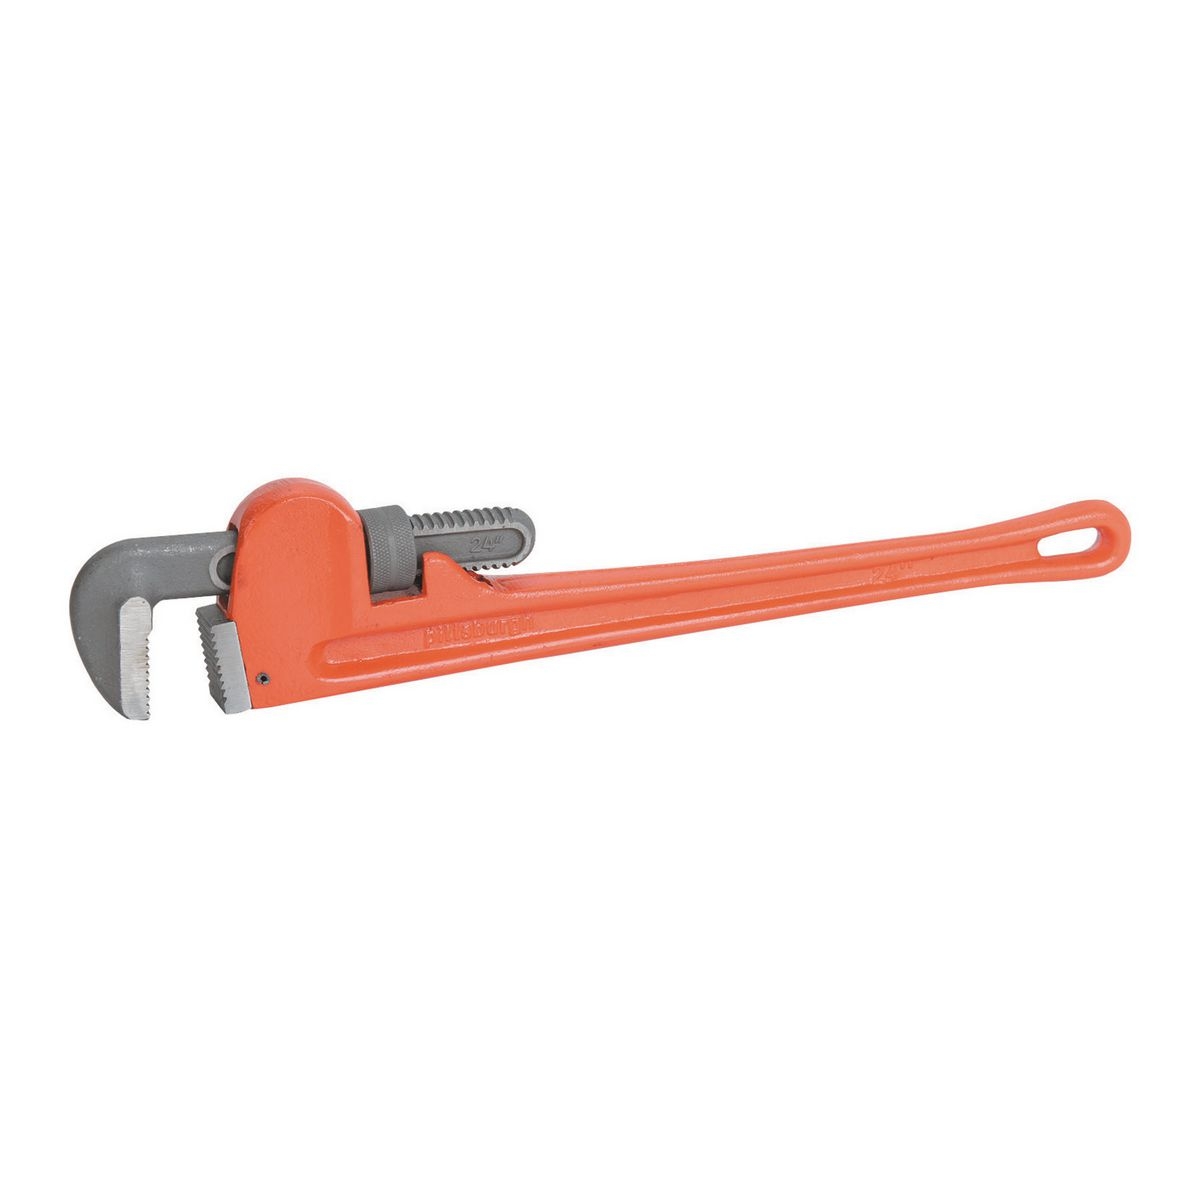 PITTSBURGH 24 in. Steel Pipe Wrench - Item 61361 / 39645